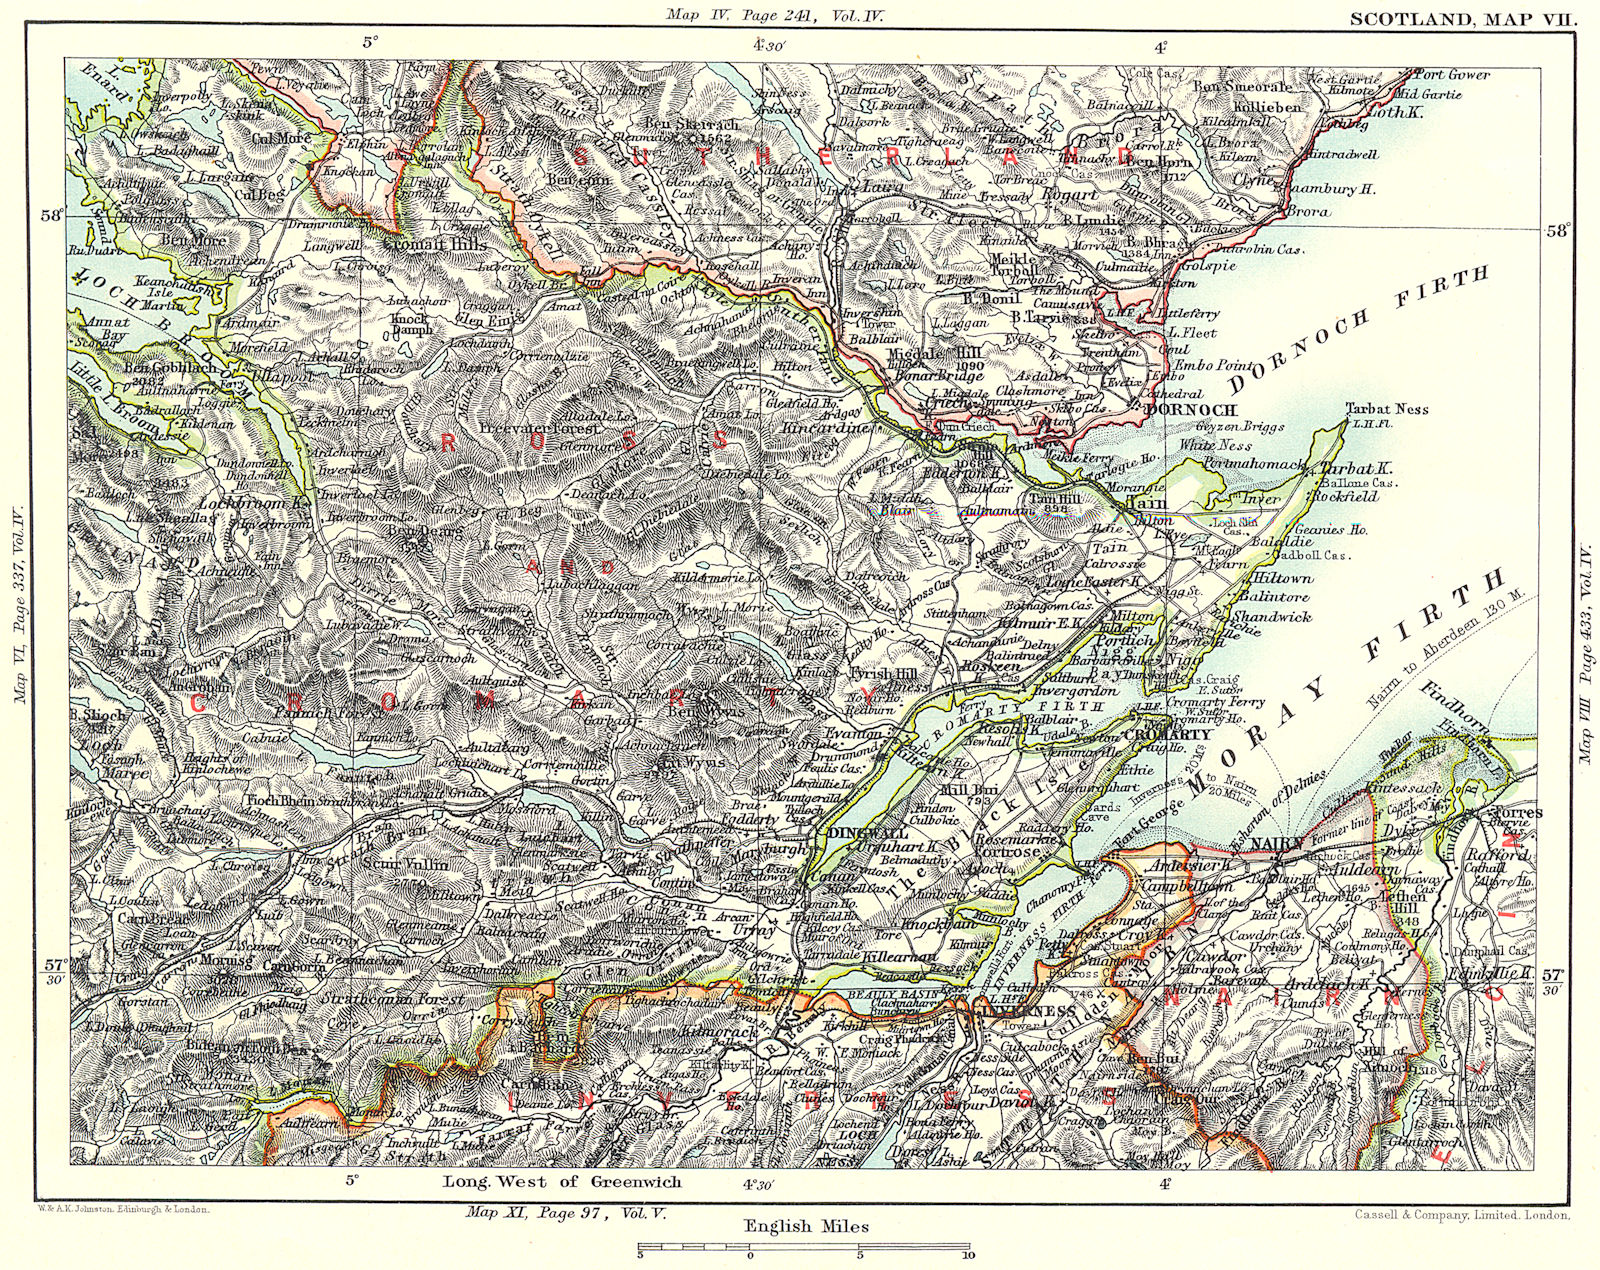 SCOTTISH HIGHLANDS. Ross/Cromarty Moray Firth Inverness Nairn Dingwall  1893 map